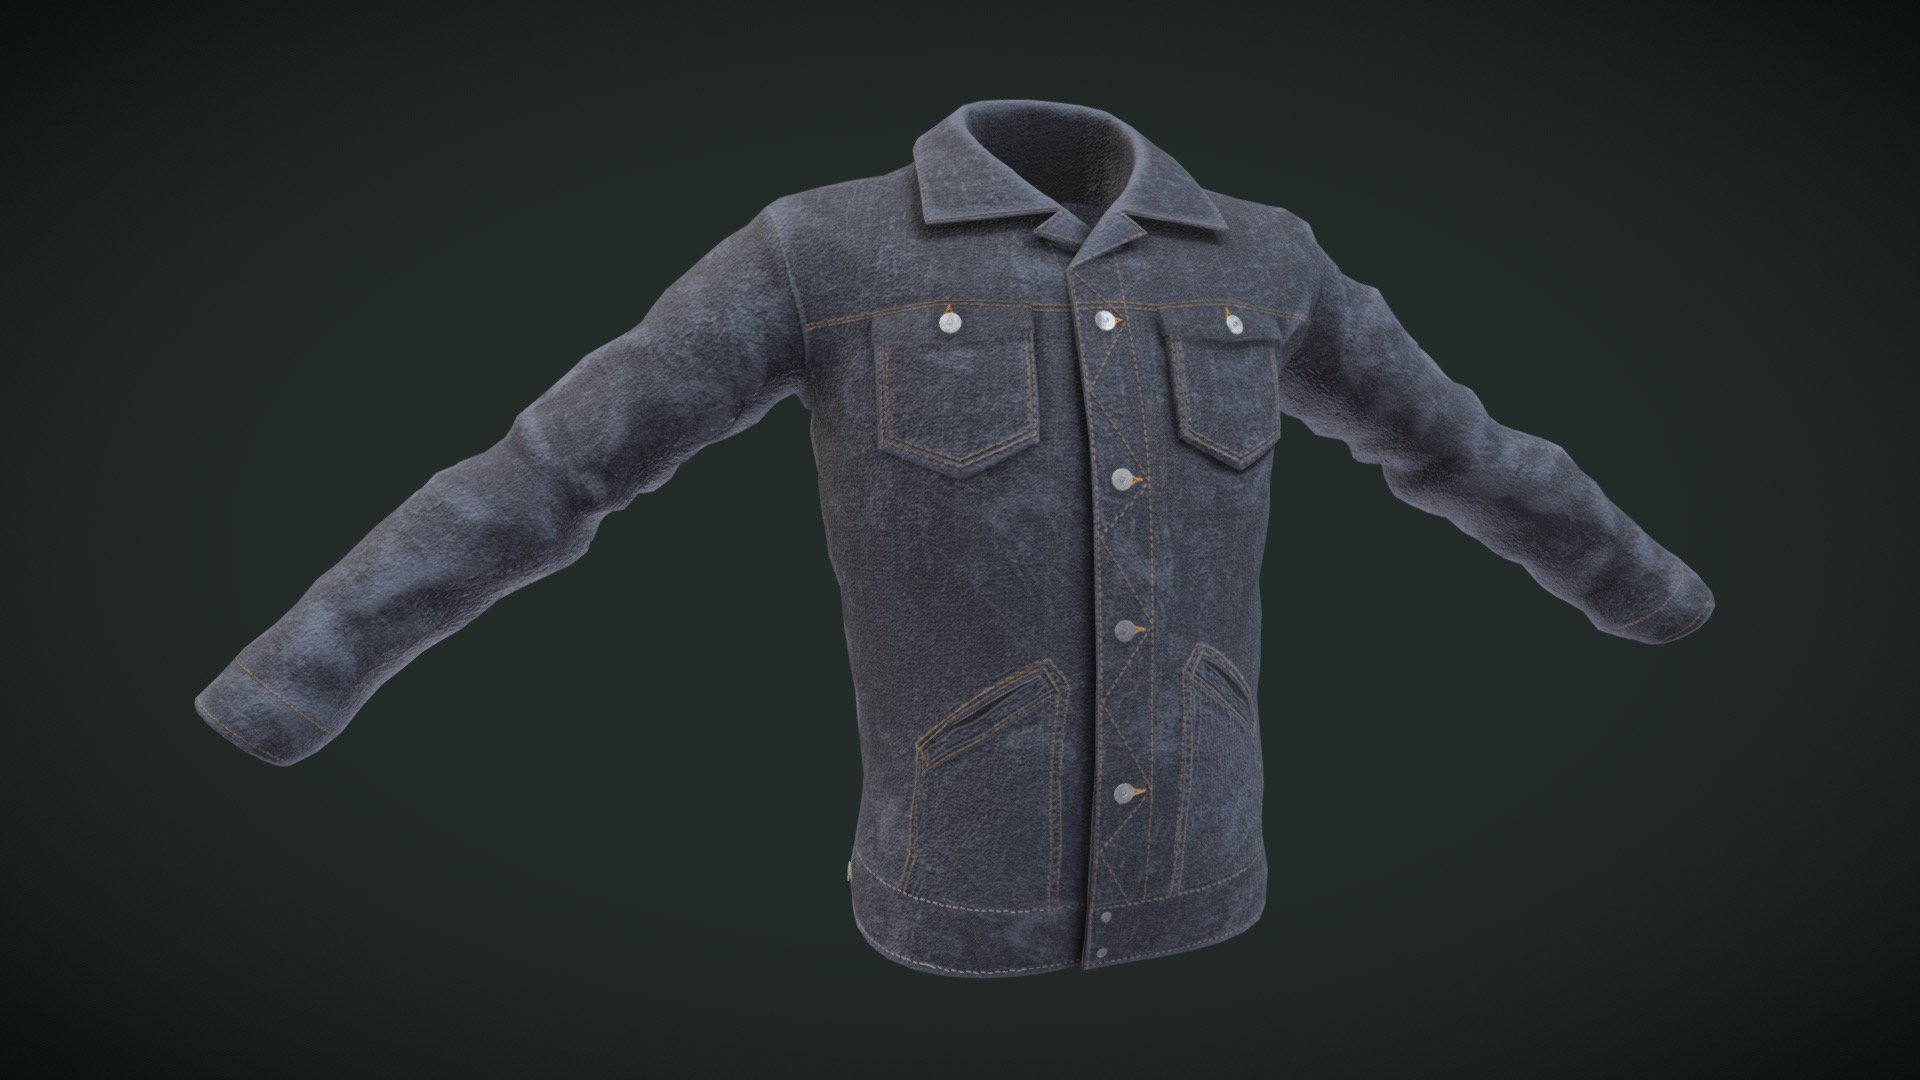 This is my first attempt at creating an article of clothing. I sculpted the high resoluion asset in zbrush, modeled the low res in Maya, and textured it in Substance Painter 3d model